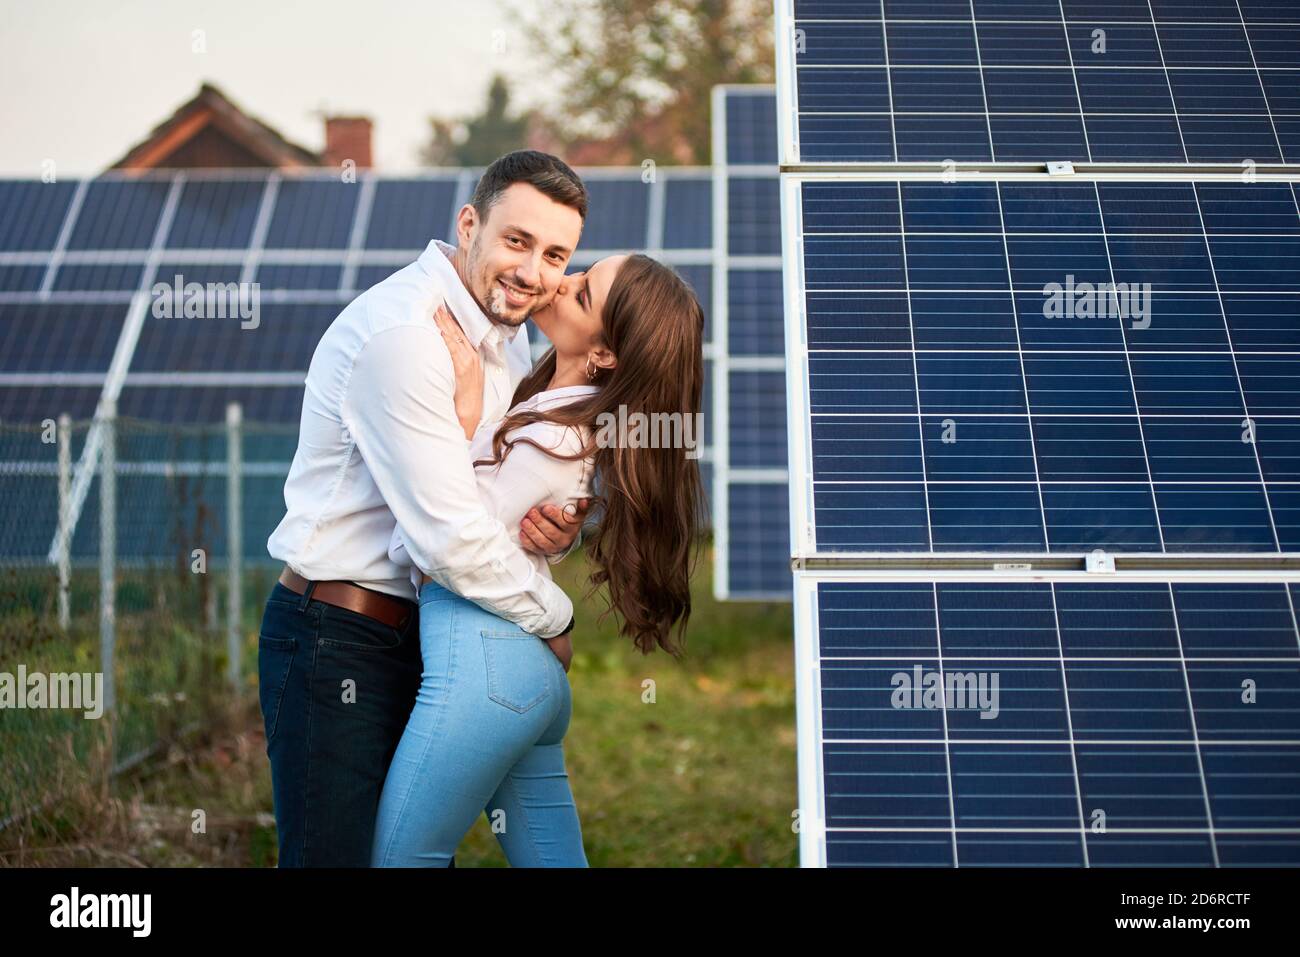 Happy couple are hugging against the background of a row of solar panels at a site near the house. Woman with long hair kisses a guy, man smiling to the camera. Solar energy concept image Stock Photo